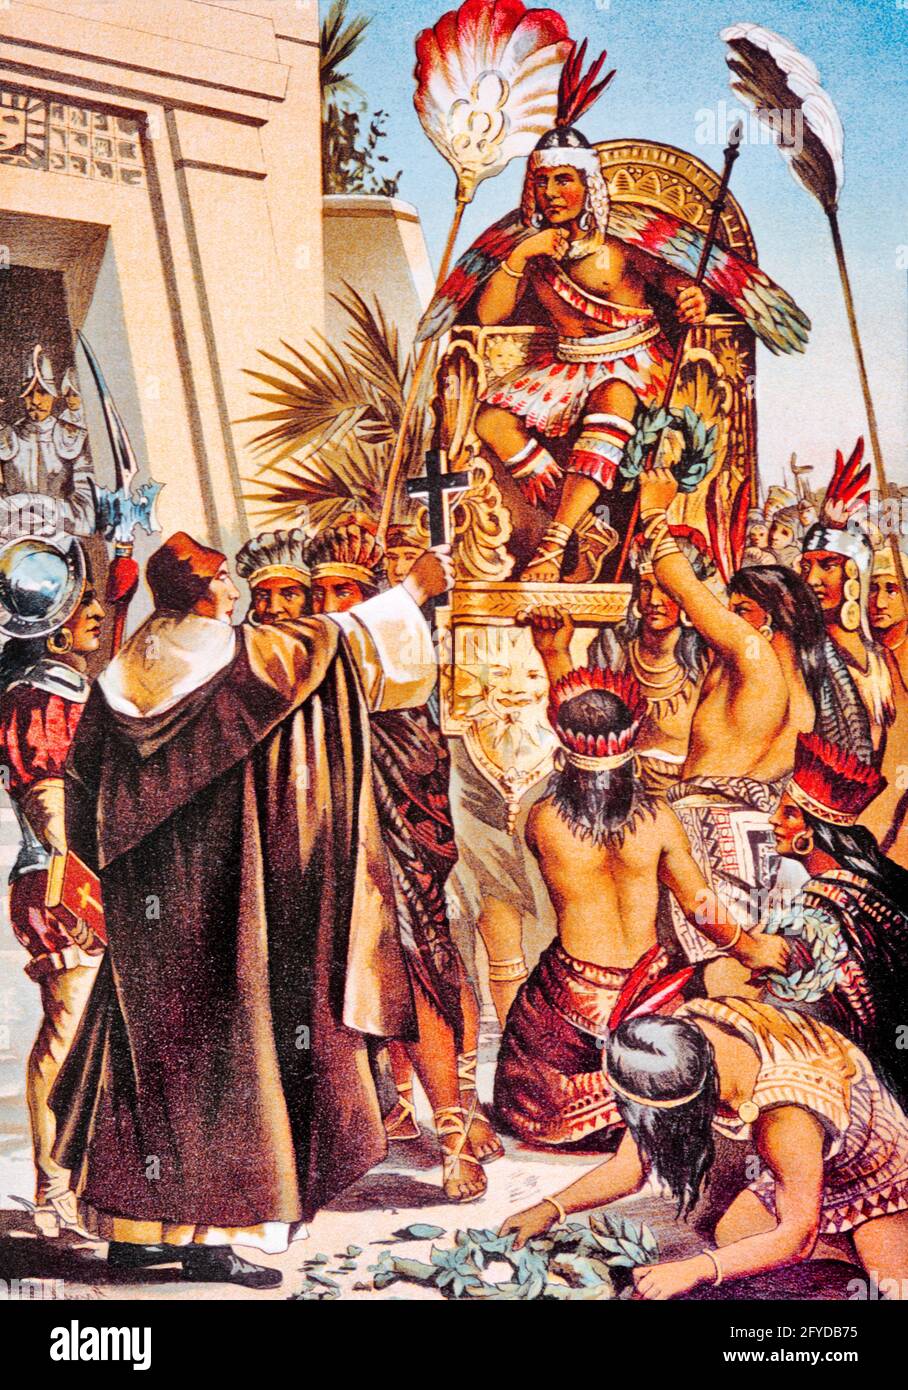 1510s MONTEZUMA II AZTEC RULER CARRIED SITTING IN HIS THRONE CONFRONTED BY SPANISH CONQUISTADORS CATHOLIC PRIEST HOLDING CROSS - kh13536 NAW001 HARS MEXICO ADVENTURE DISCOVERY HIS STRENGTH STRATEGY RULER CONFRONTATION LEADERSHIP LOW ANGLE PROGRESS PRIDE OF AUTHORITY OCCUPATIONS POLITICS CONCEPTUAL THRONE SECOND STYLISH CONQUEST NATIVE AMERICAN CONFRONTED CARRIED CONQUISTADORS DIED NATIVE AMERICANS 1510s 1520 CATHOLIC CAUCASIAN ETHNICITY CENTRAL AMERICA DISEASE INDIGENOUS MONTEZUMA OLD FASHIONED SMALLPOX Stock Photo